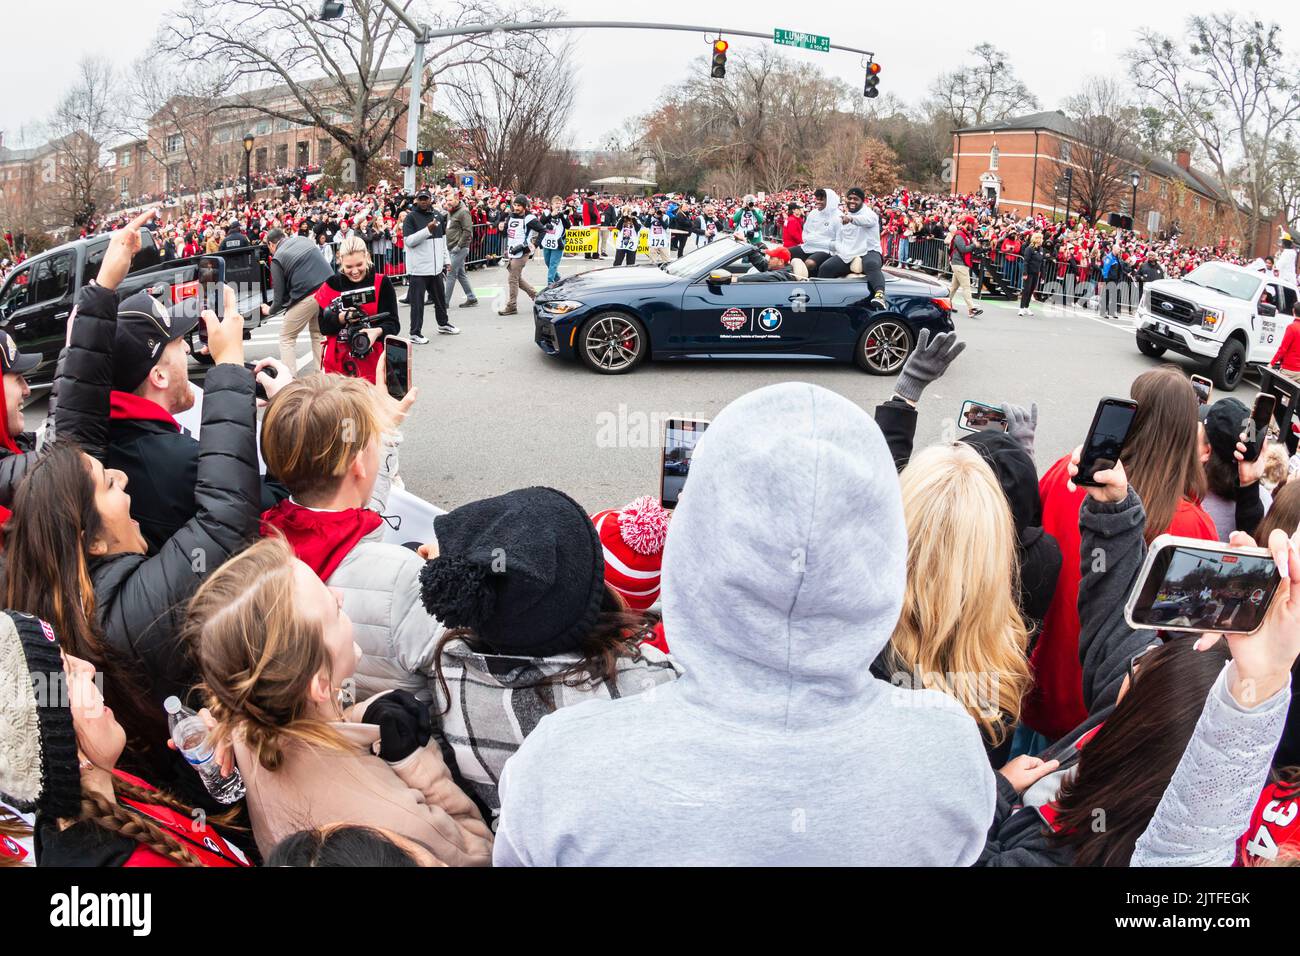 ATHENS, GA - JANUARY 15, 2022: Thousands of UGA football fans cheer on the players as they celebrate at Georgia's National Championship victory parade. Stock Photo